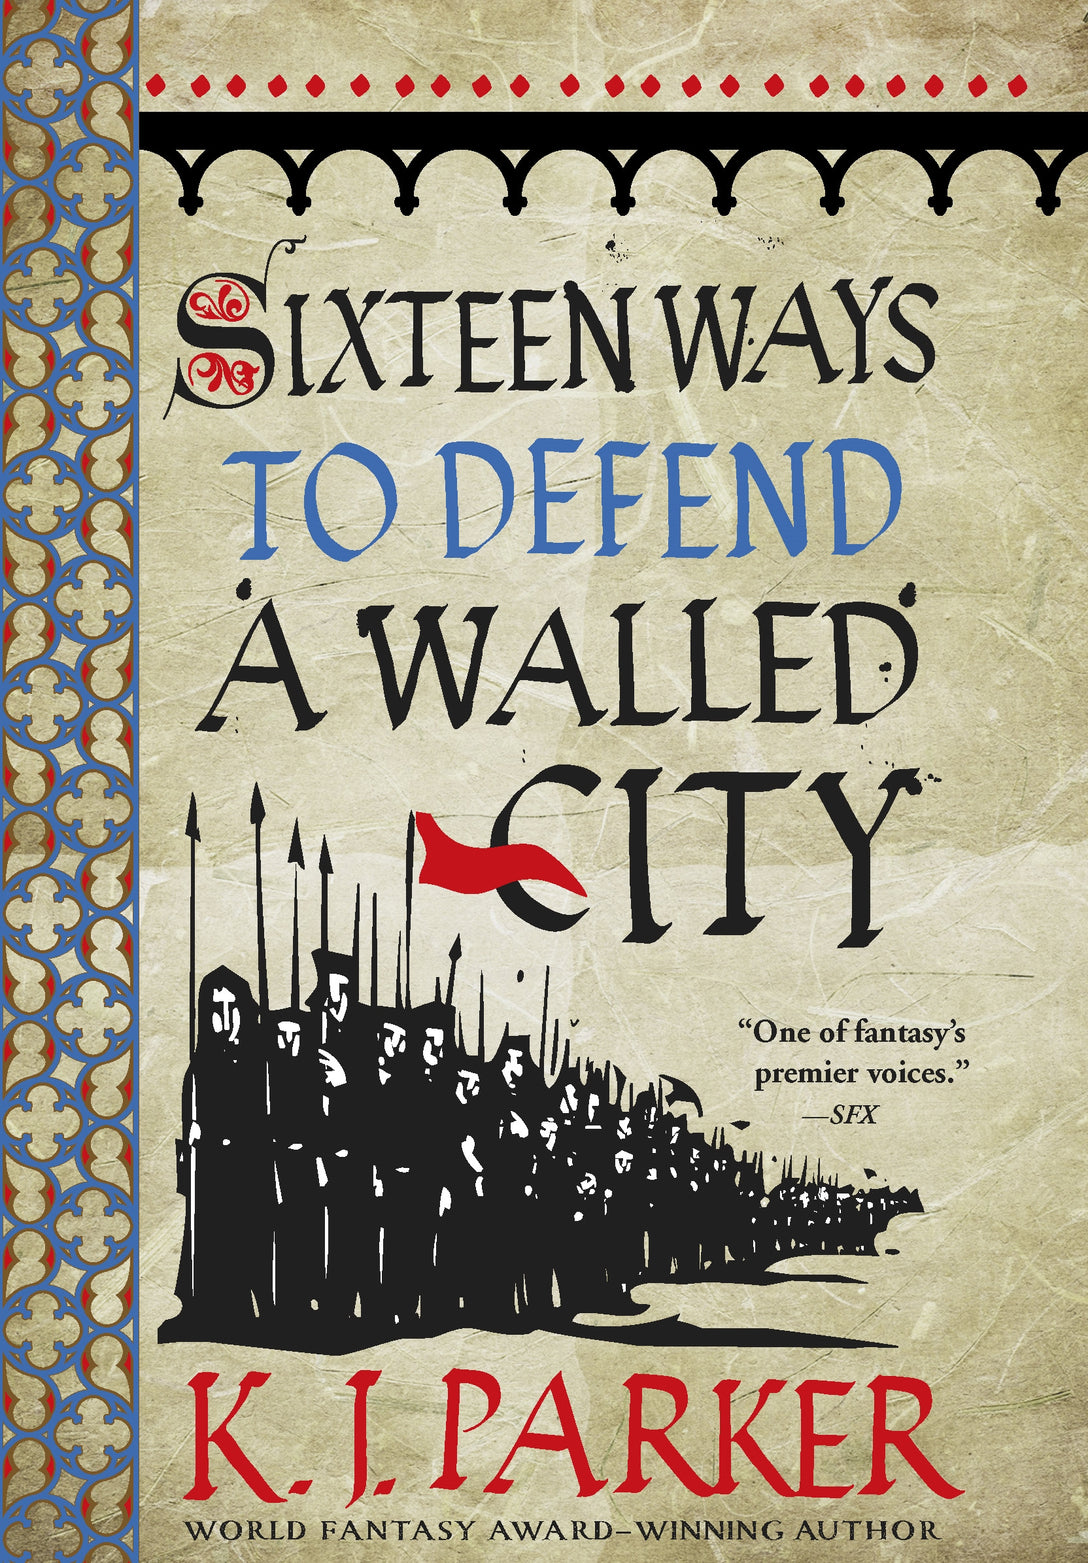 Sixteen Ways to Defend a Walled City by K. J. Parker